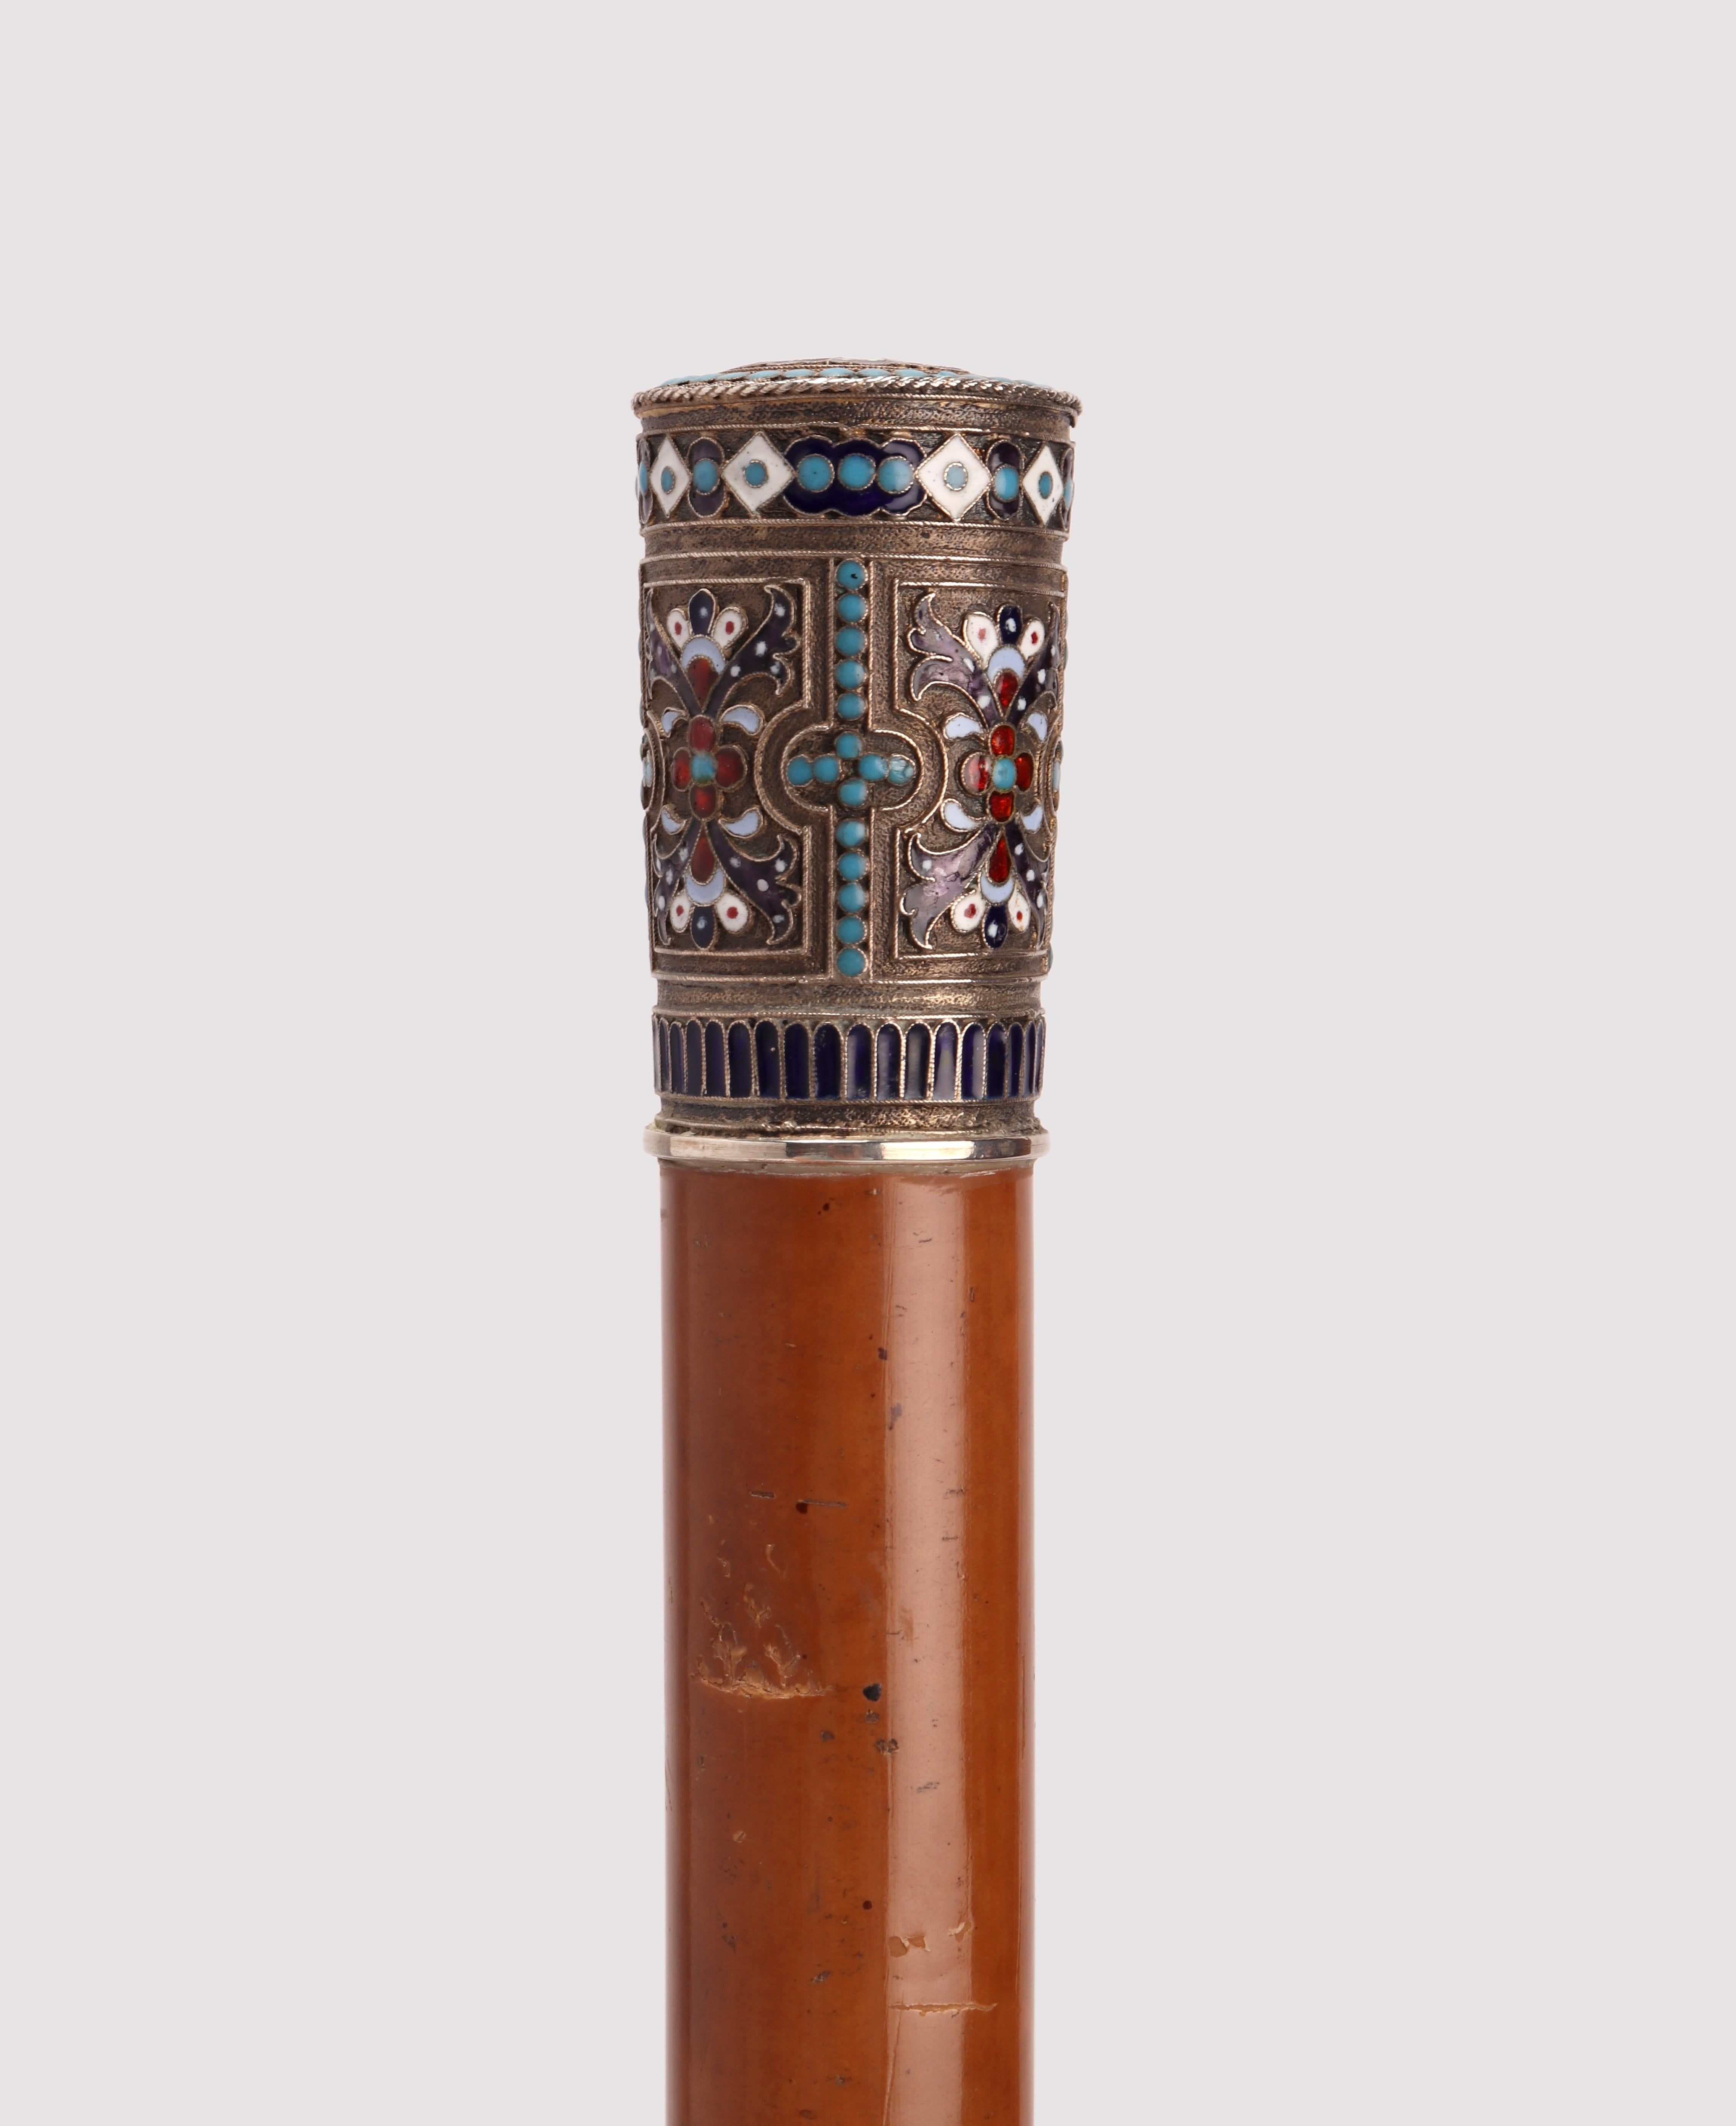 Jewel walking stick. The handle is entirely decorated with Russian style geometrical motive enriched by different colors of opaque enamels by using the cloisonné technique. It shows the Moscow hallmark, the number 84, and the initials of the jewel